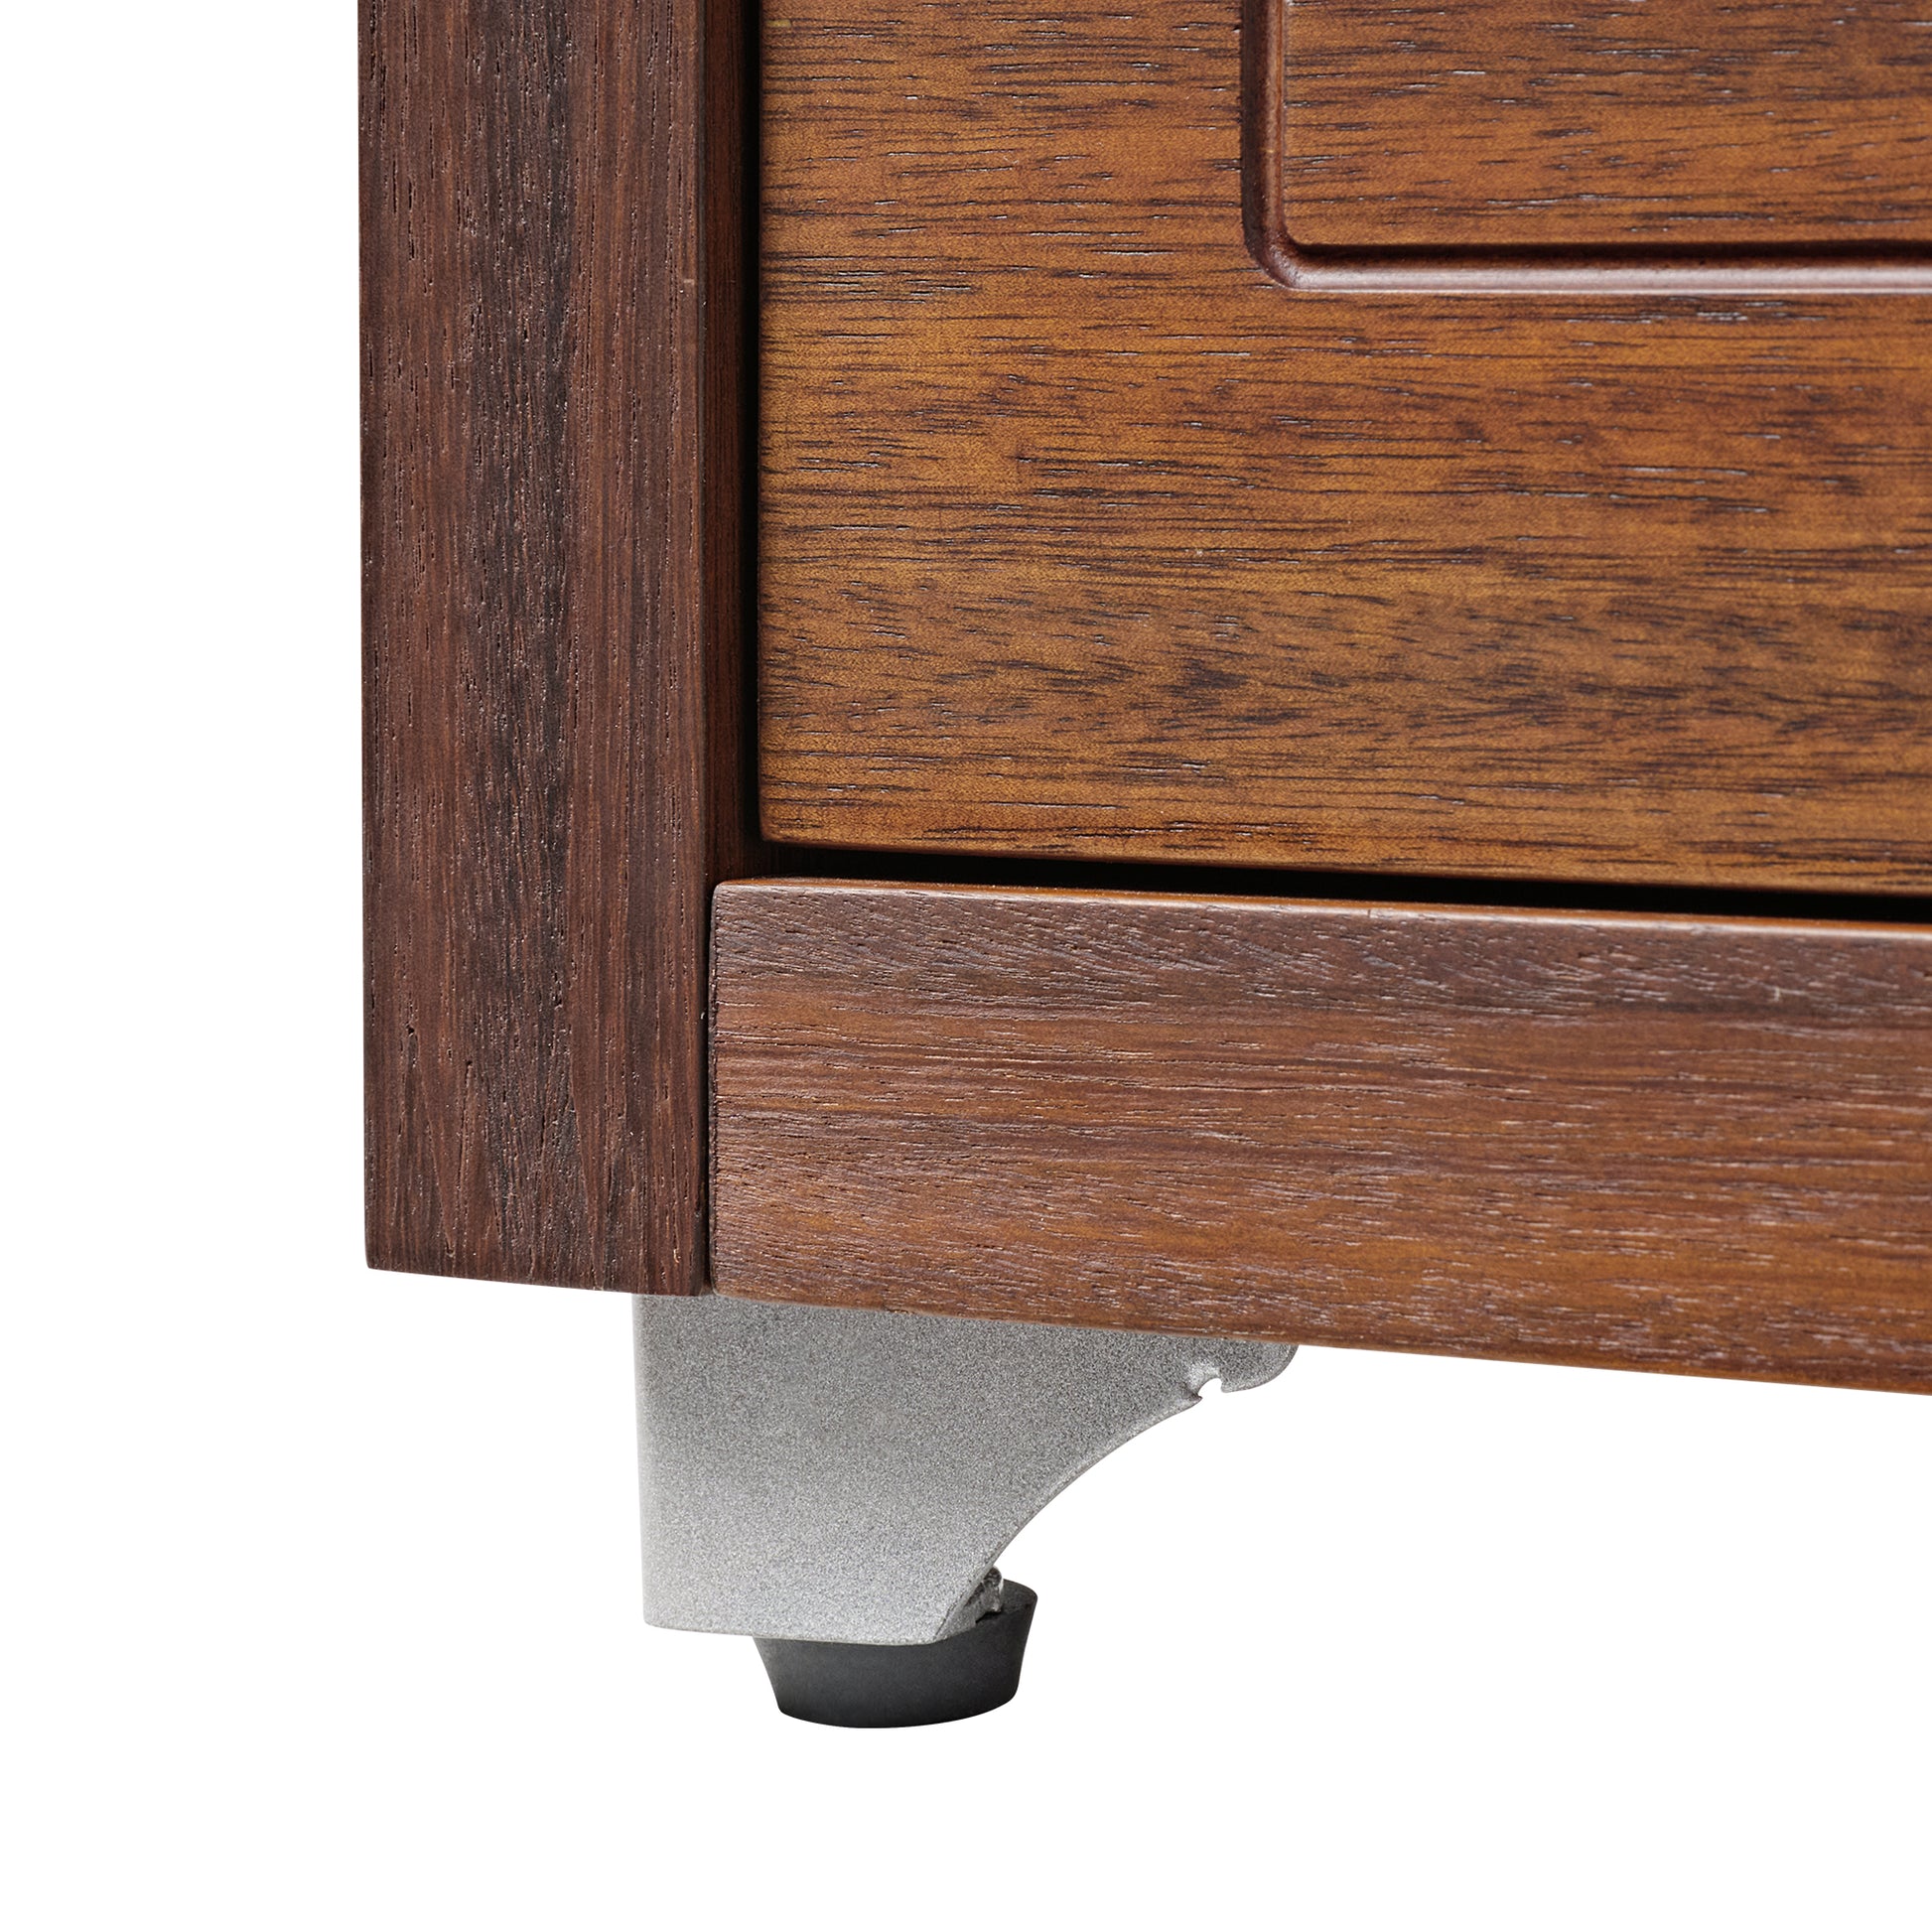 Executive Ark 19 inch file storage cabinet with walnut finish and sturdy metal legs